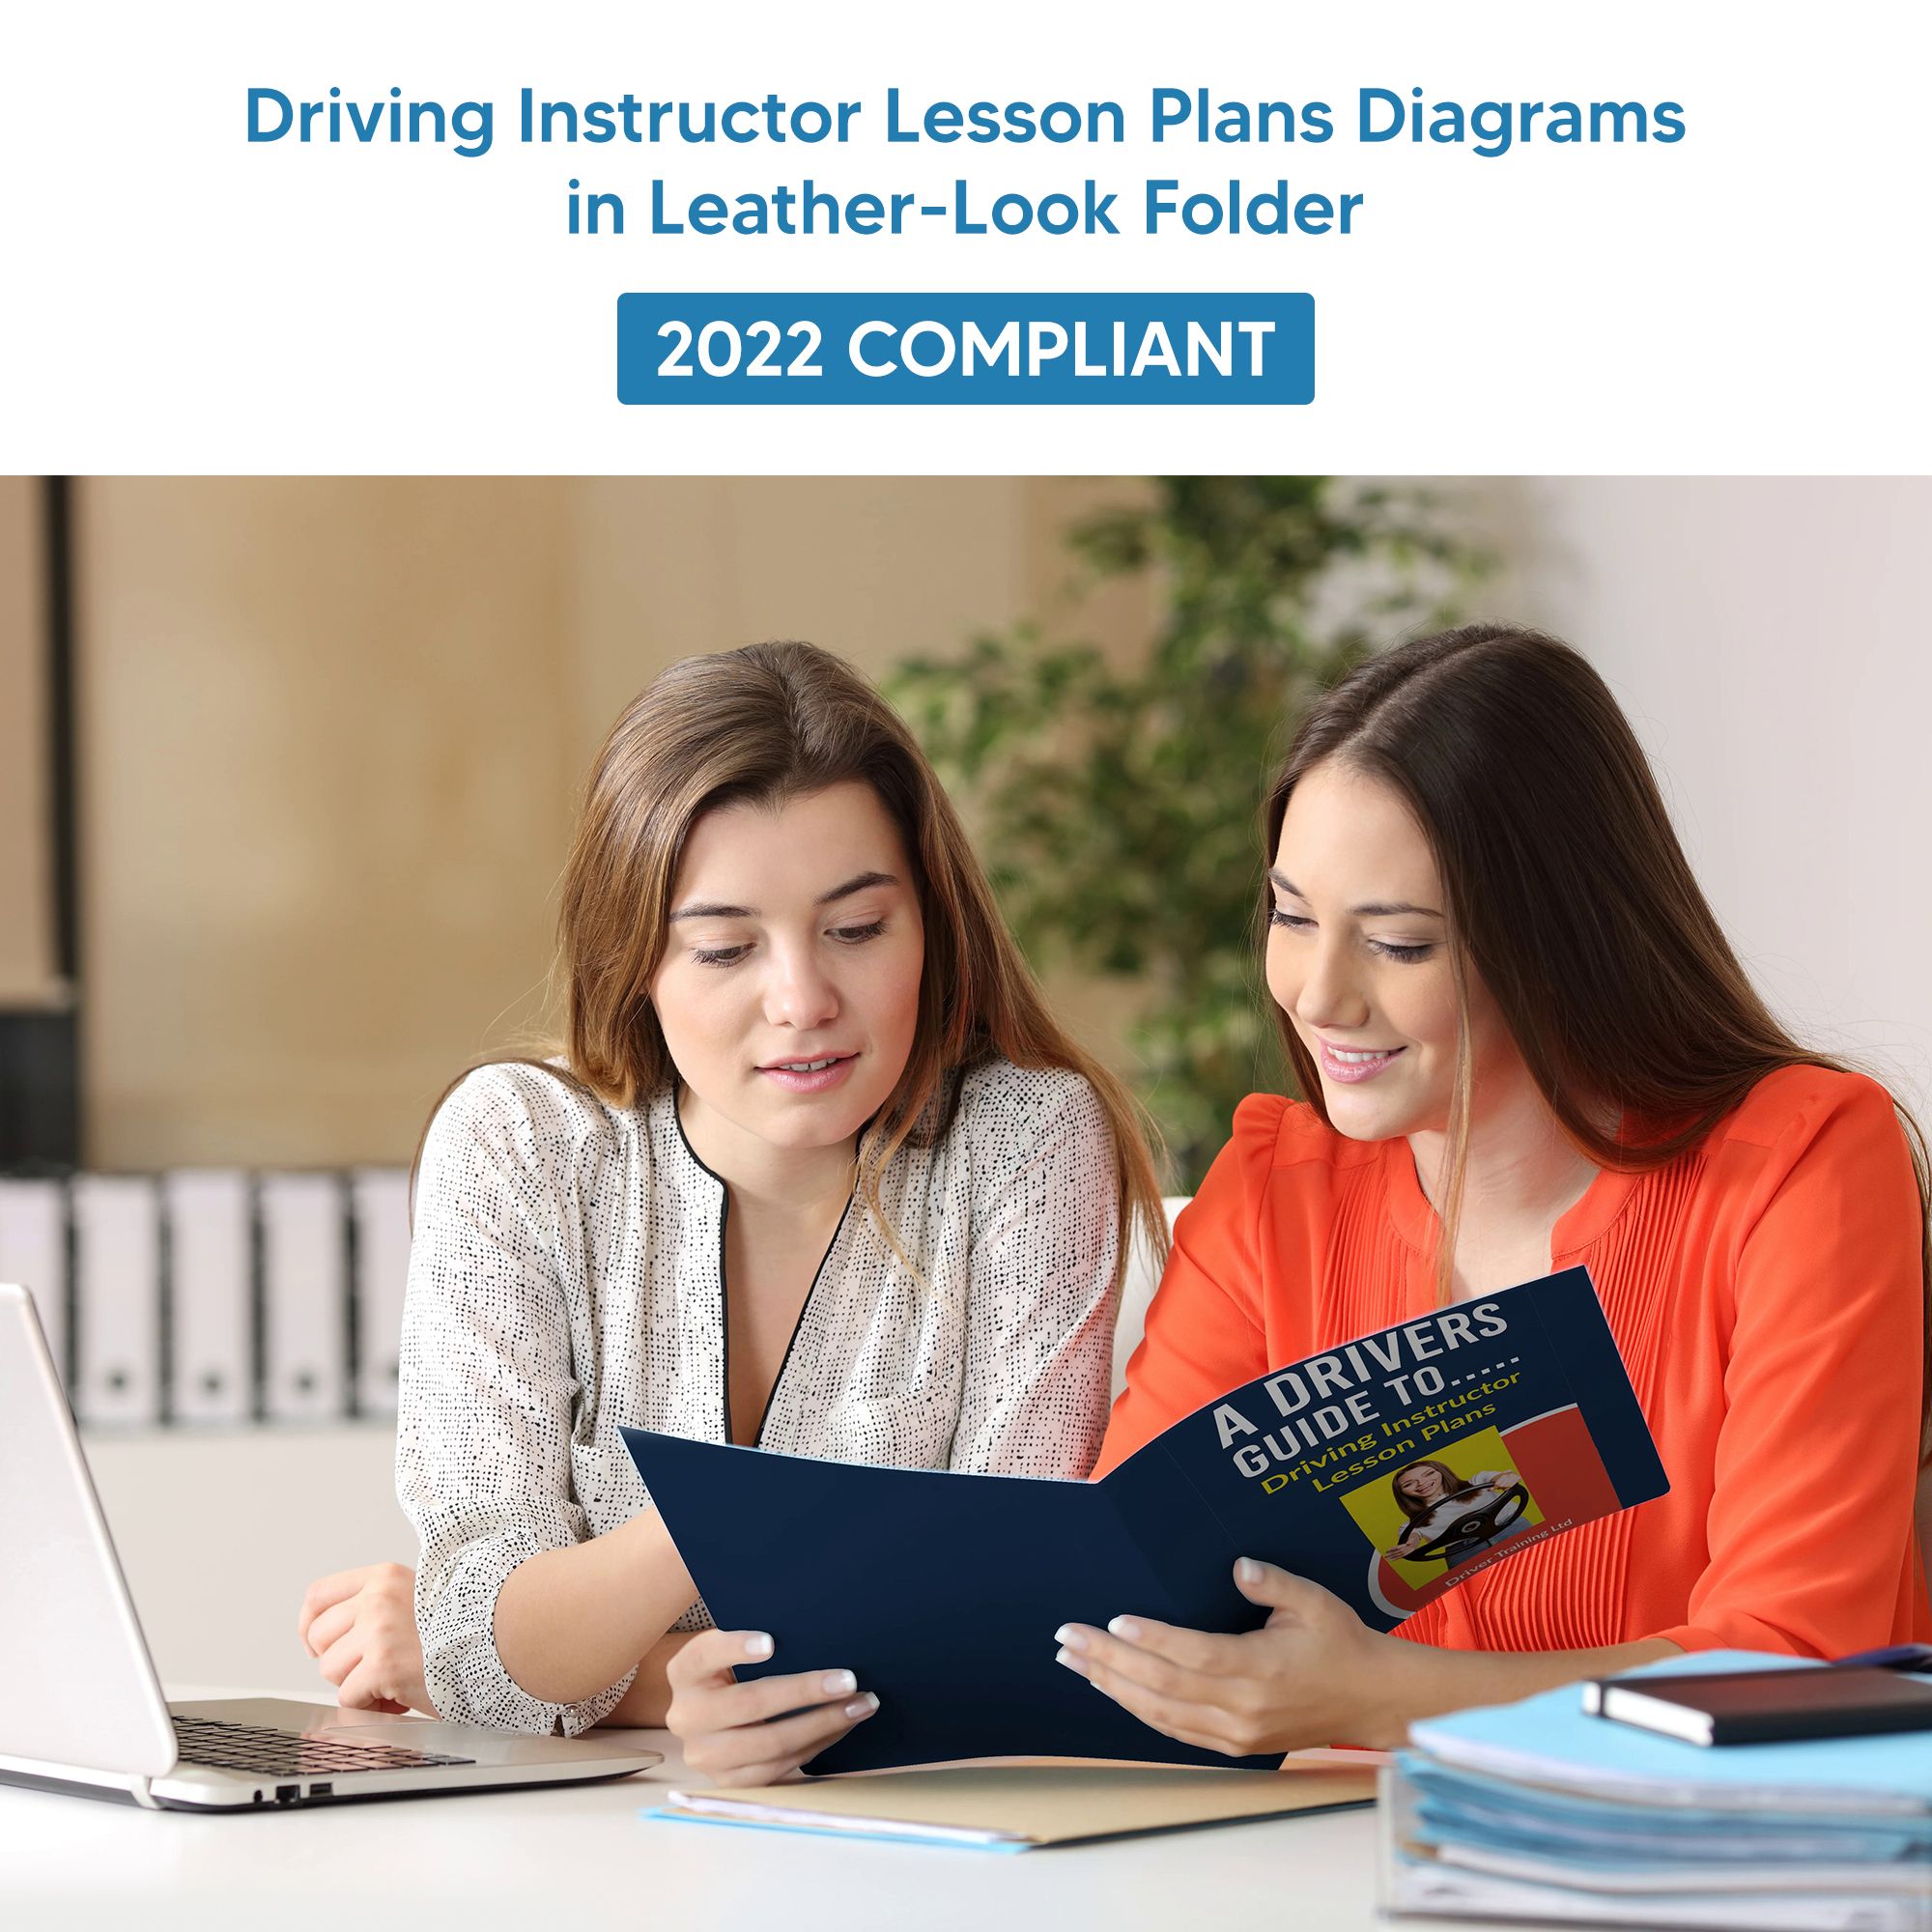 Driving instructor lesson plans